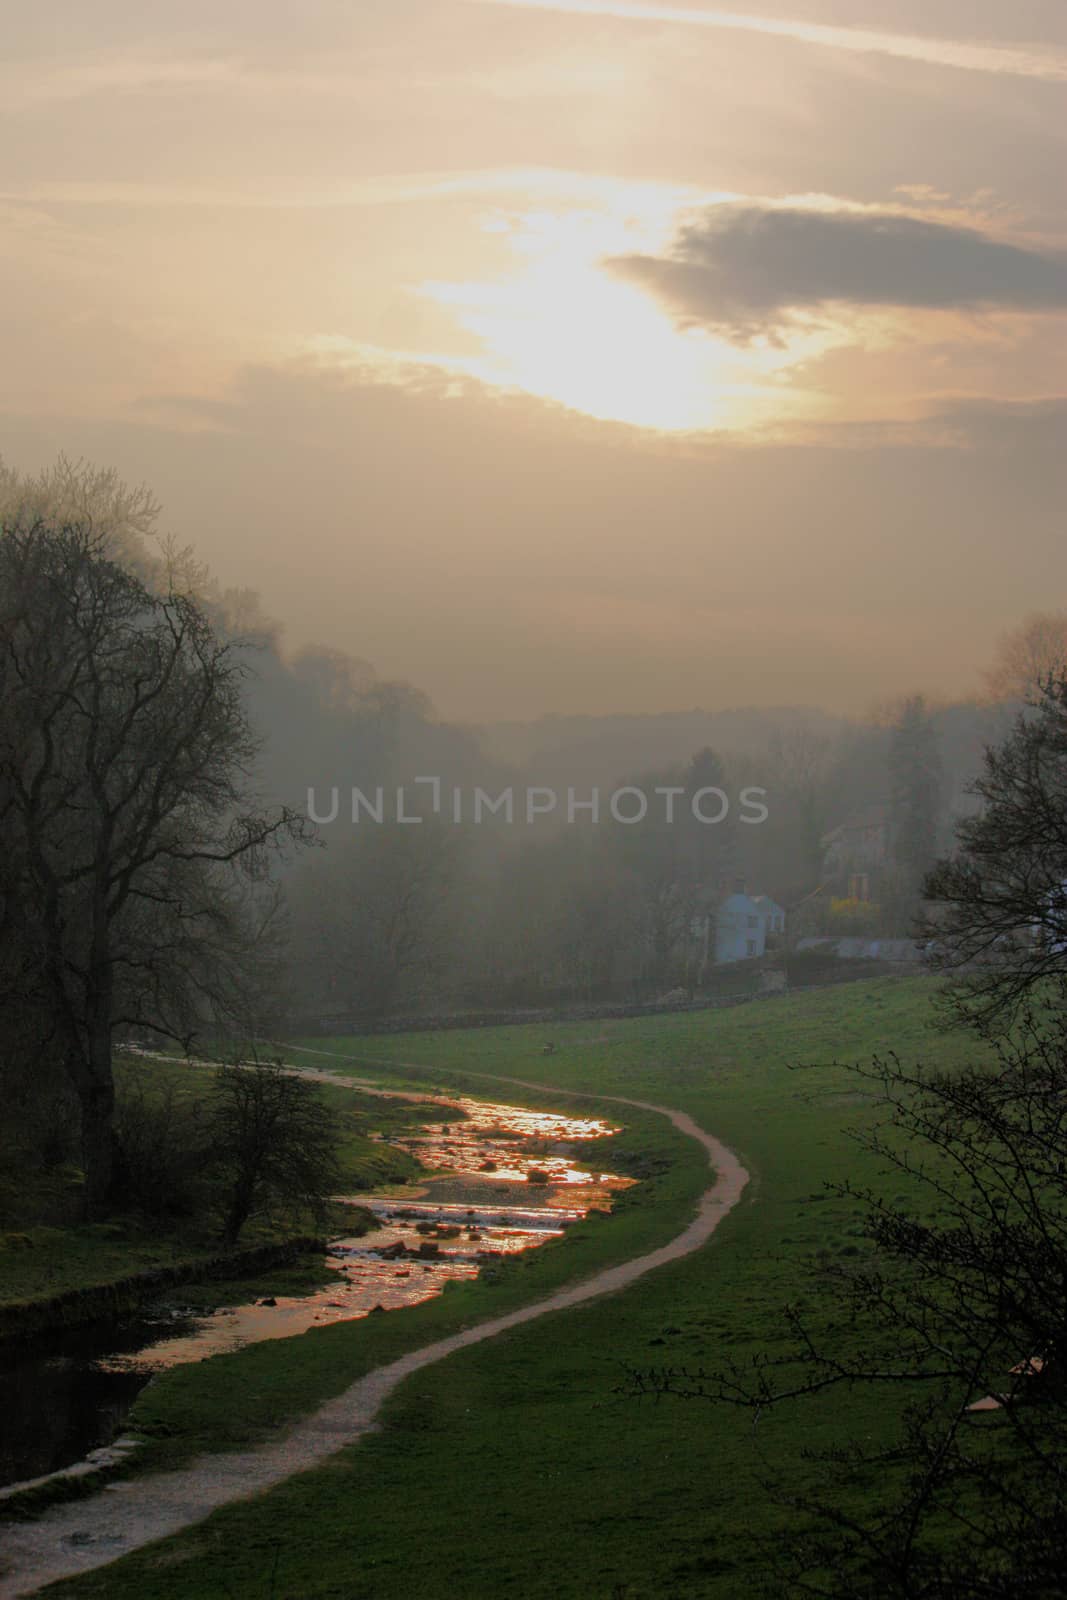 The river running through the village of Youlgreave, Derbyshire by chrisga